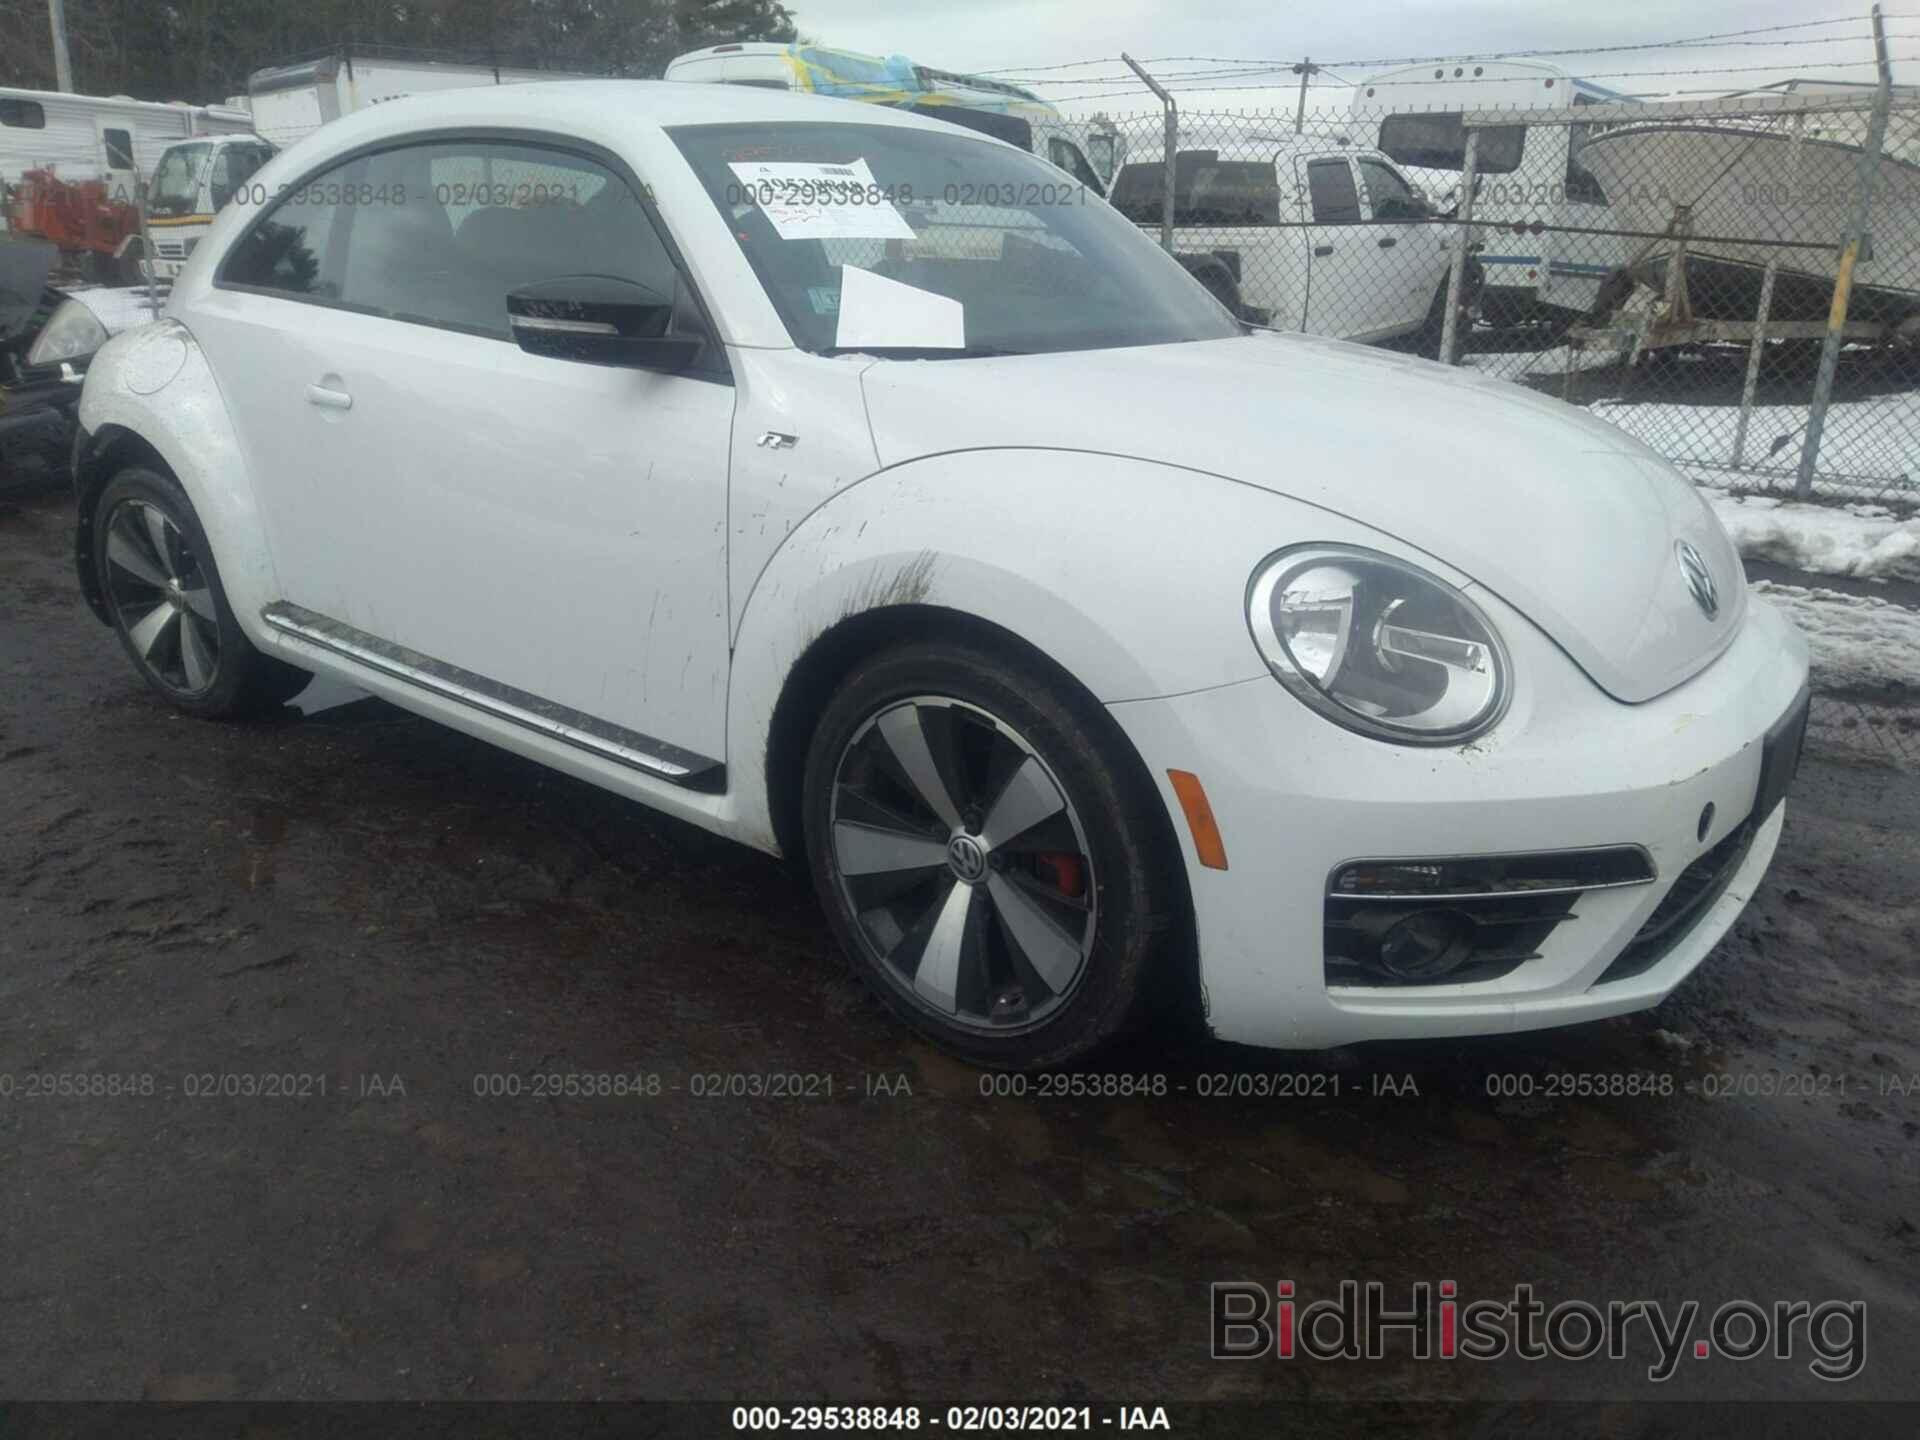 Photo 3VW4T7AT3EM663915 - VOLKSWAGEN BEETLE COUPE 2014